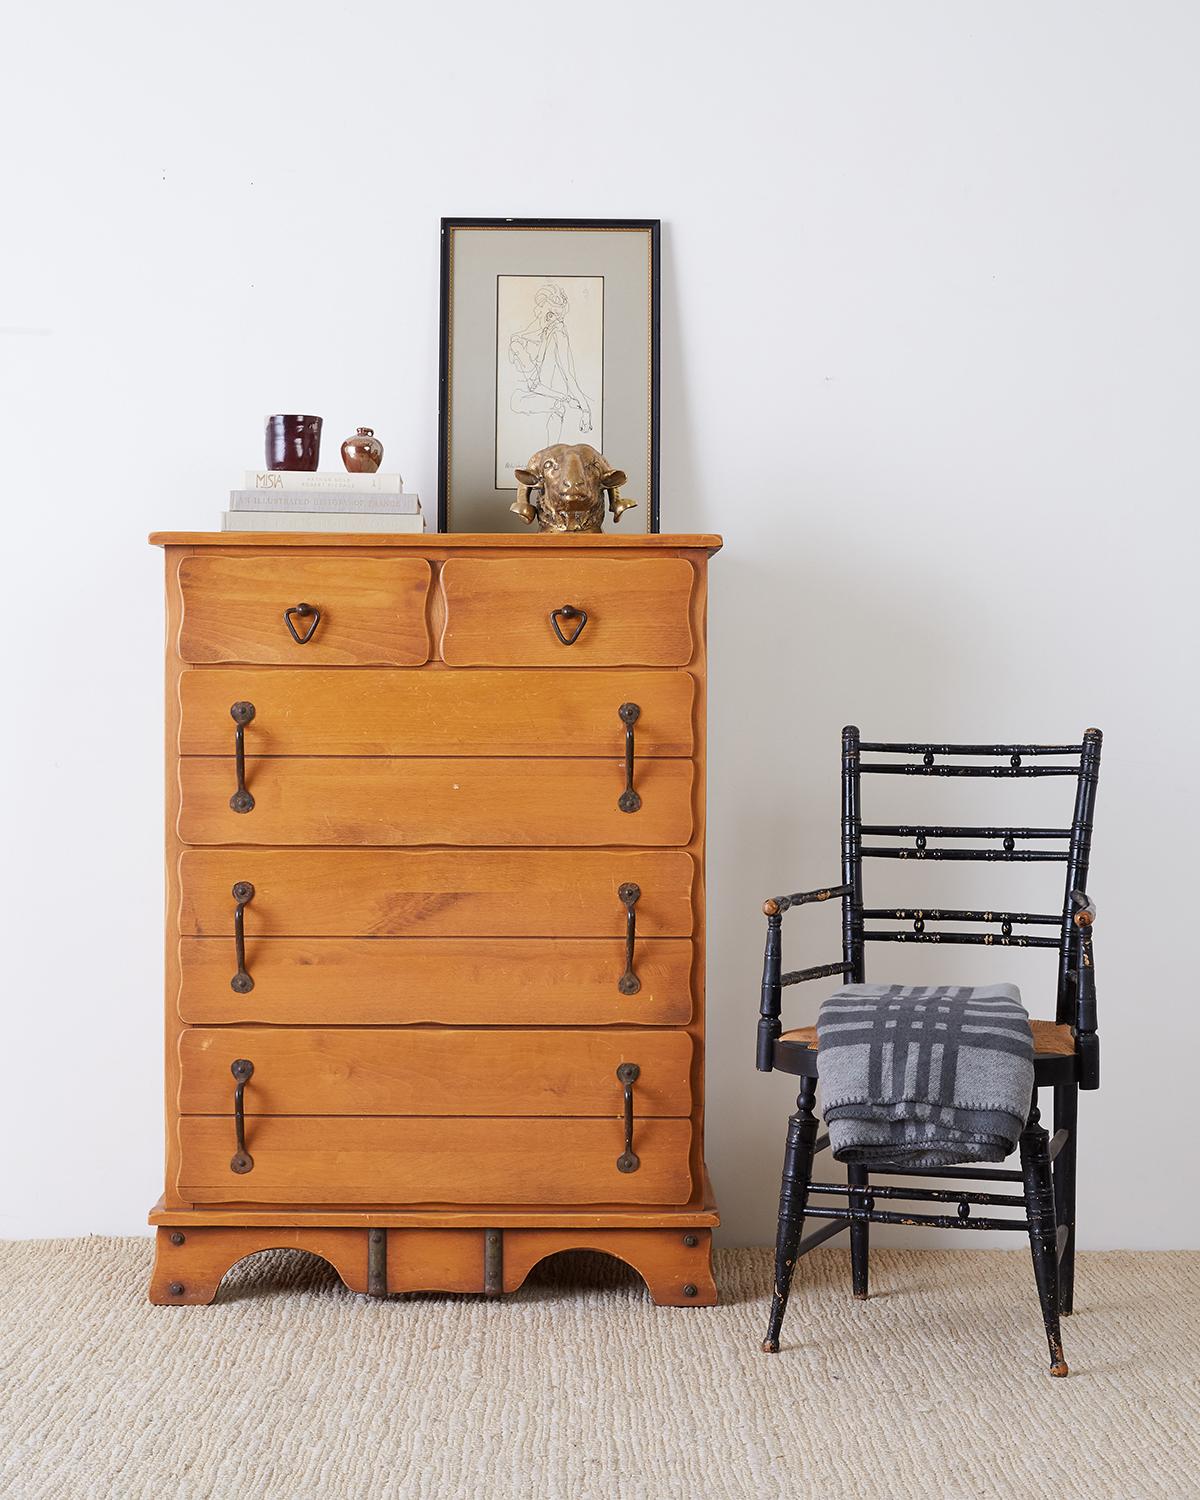 Classic Rancho Monterey chest of drawers or dresser by Frank Mason for Mason Furniture. California Mission style made of handcrafted alder and iron from Oregon. Five large storage drawers with hand-hammered iron pulls. Each drawer and top having